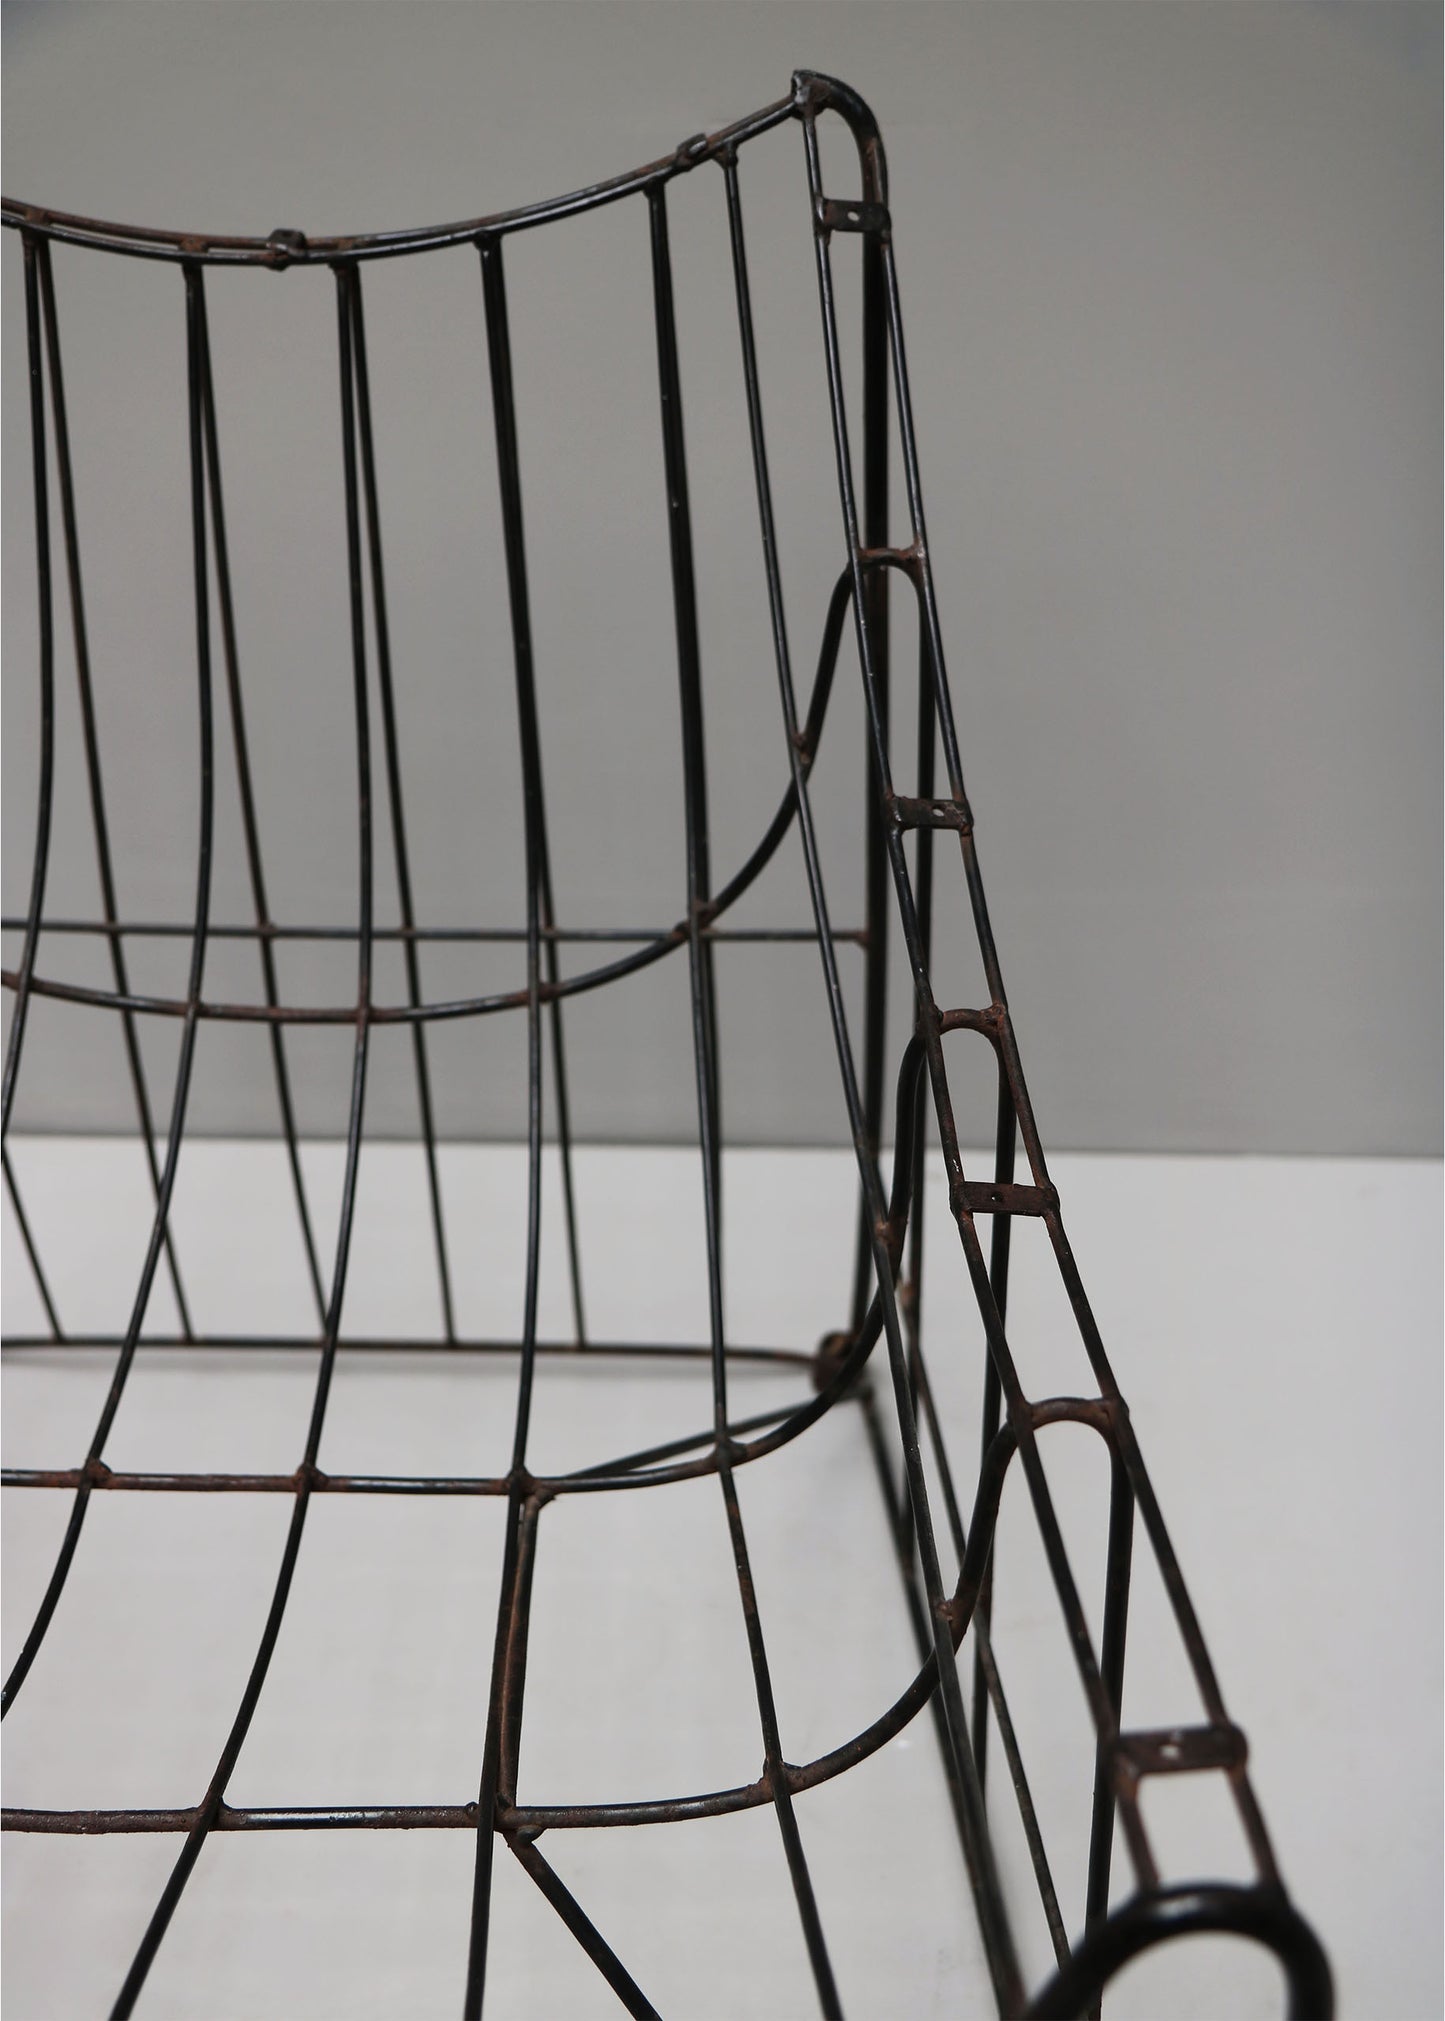 ENGLISH WIRE CHAIR